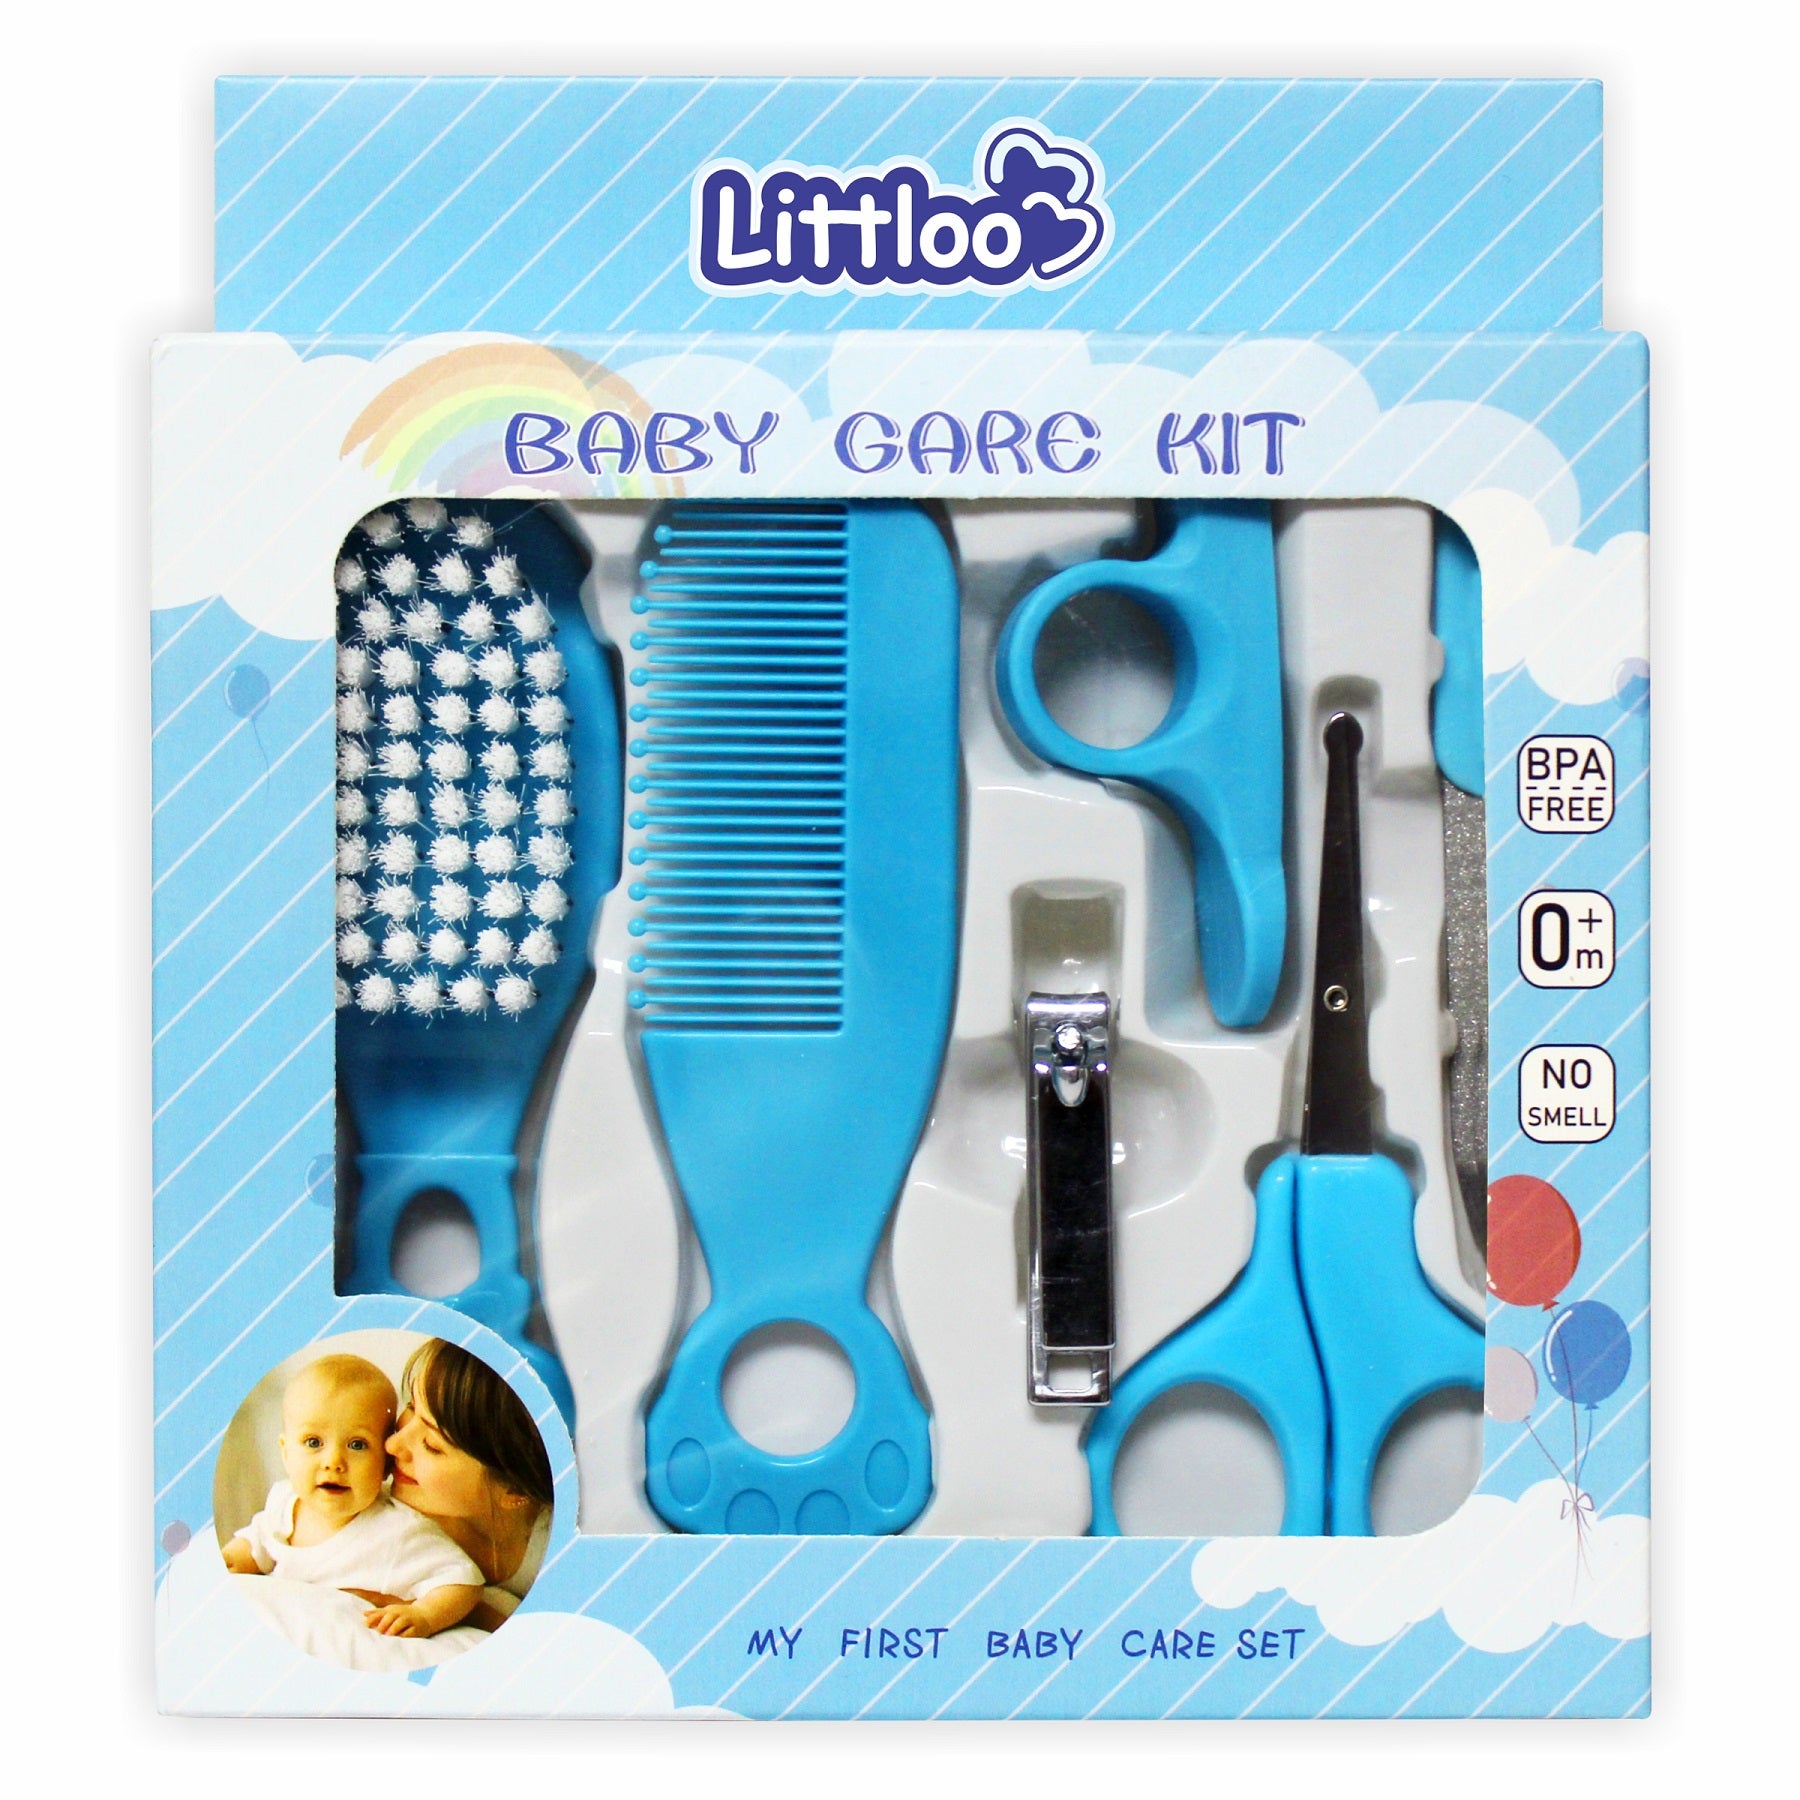 Littloo All in 1 Baby Care Kit for Your Little One! | Hair Brush, Comb, Nail Clipper, Scissors, and Nail Filer - Blue - Littloo